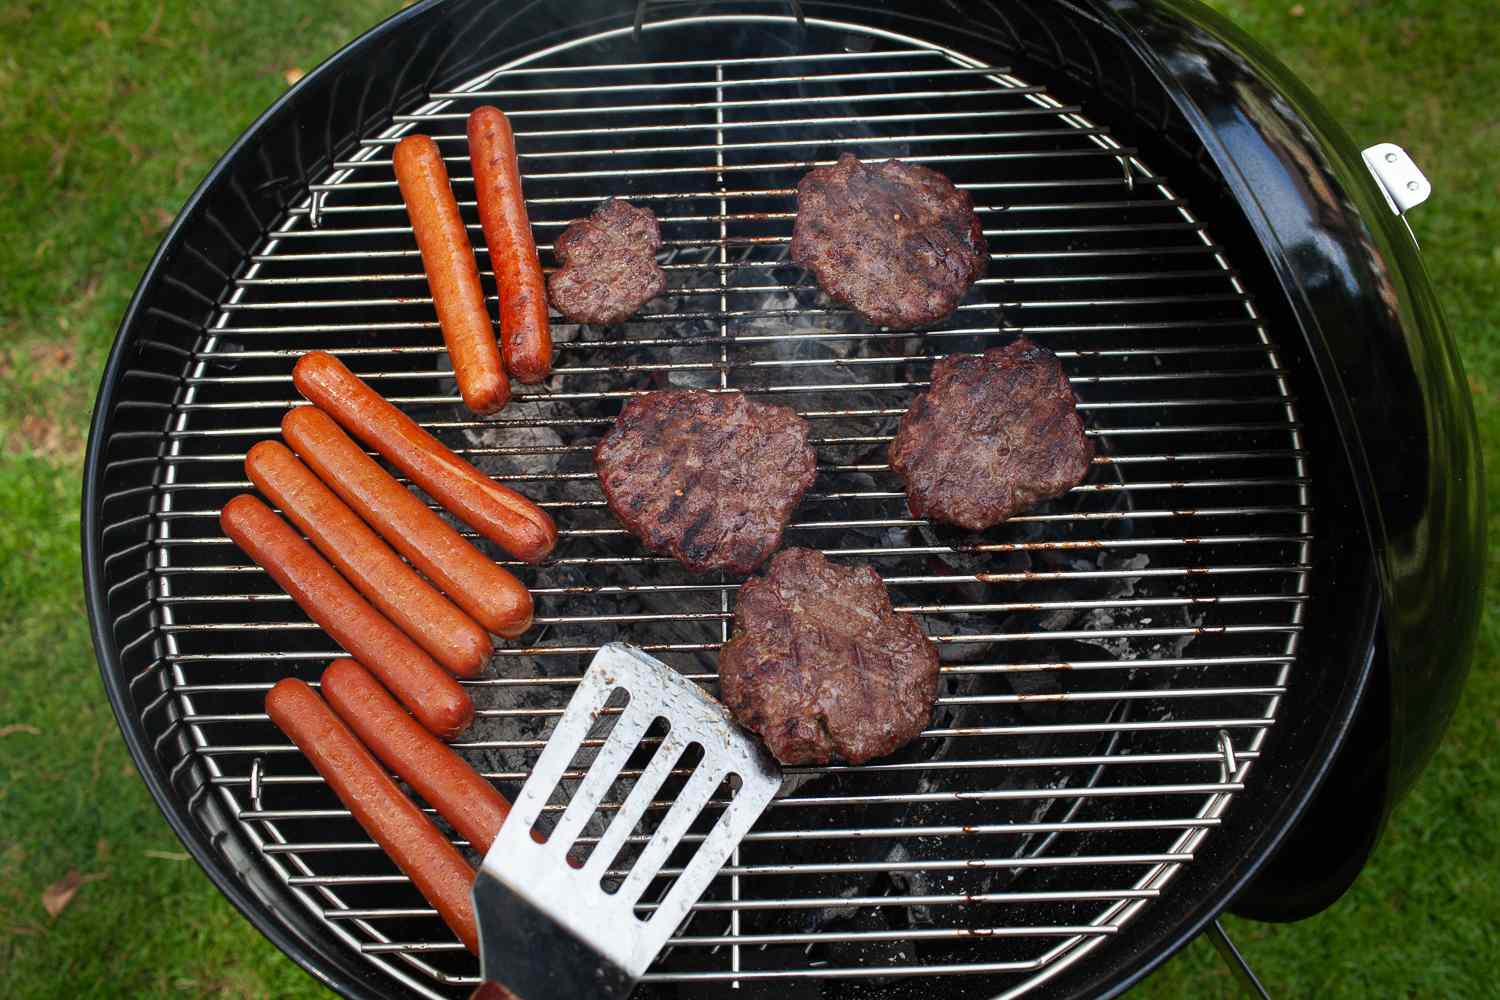 Weber Original Kettle Premium 22-inch Charcoal Grill with burgers and hot dogs on the grates